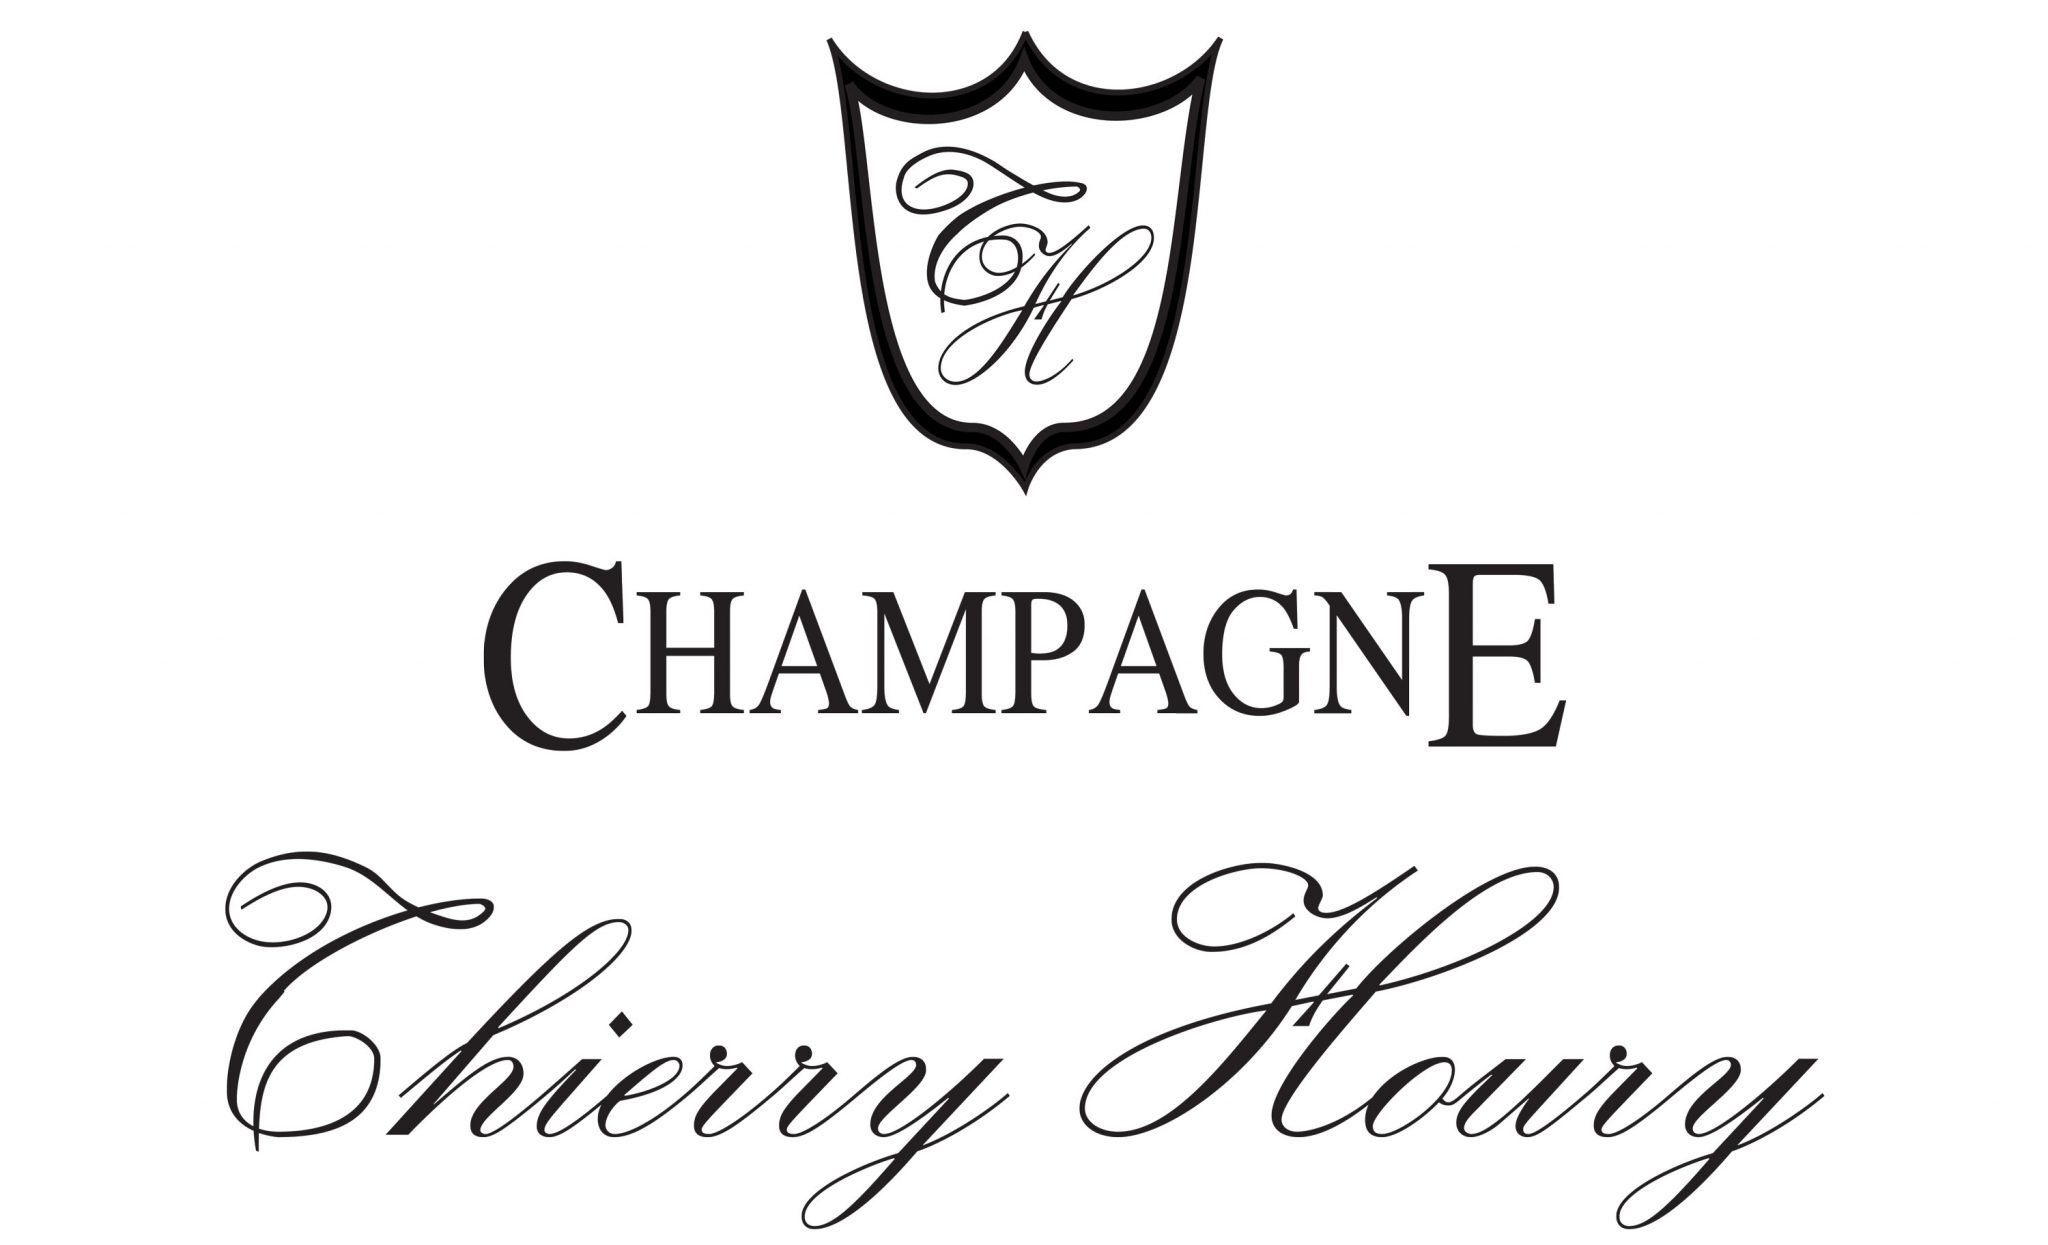 Champagne Thierry Houry